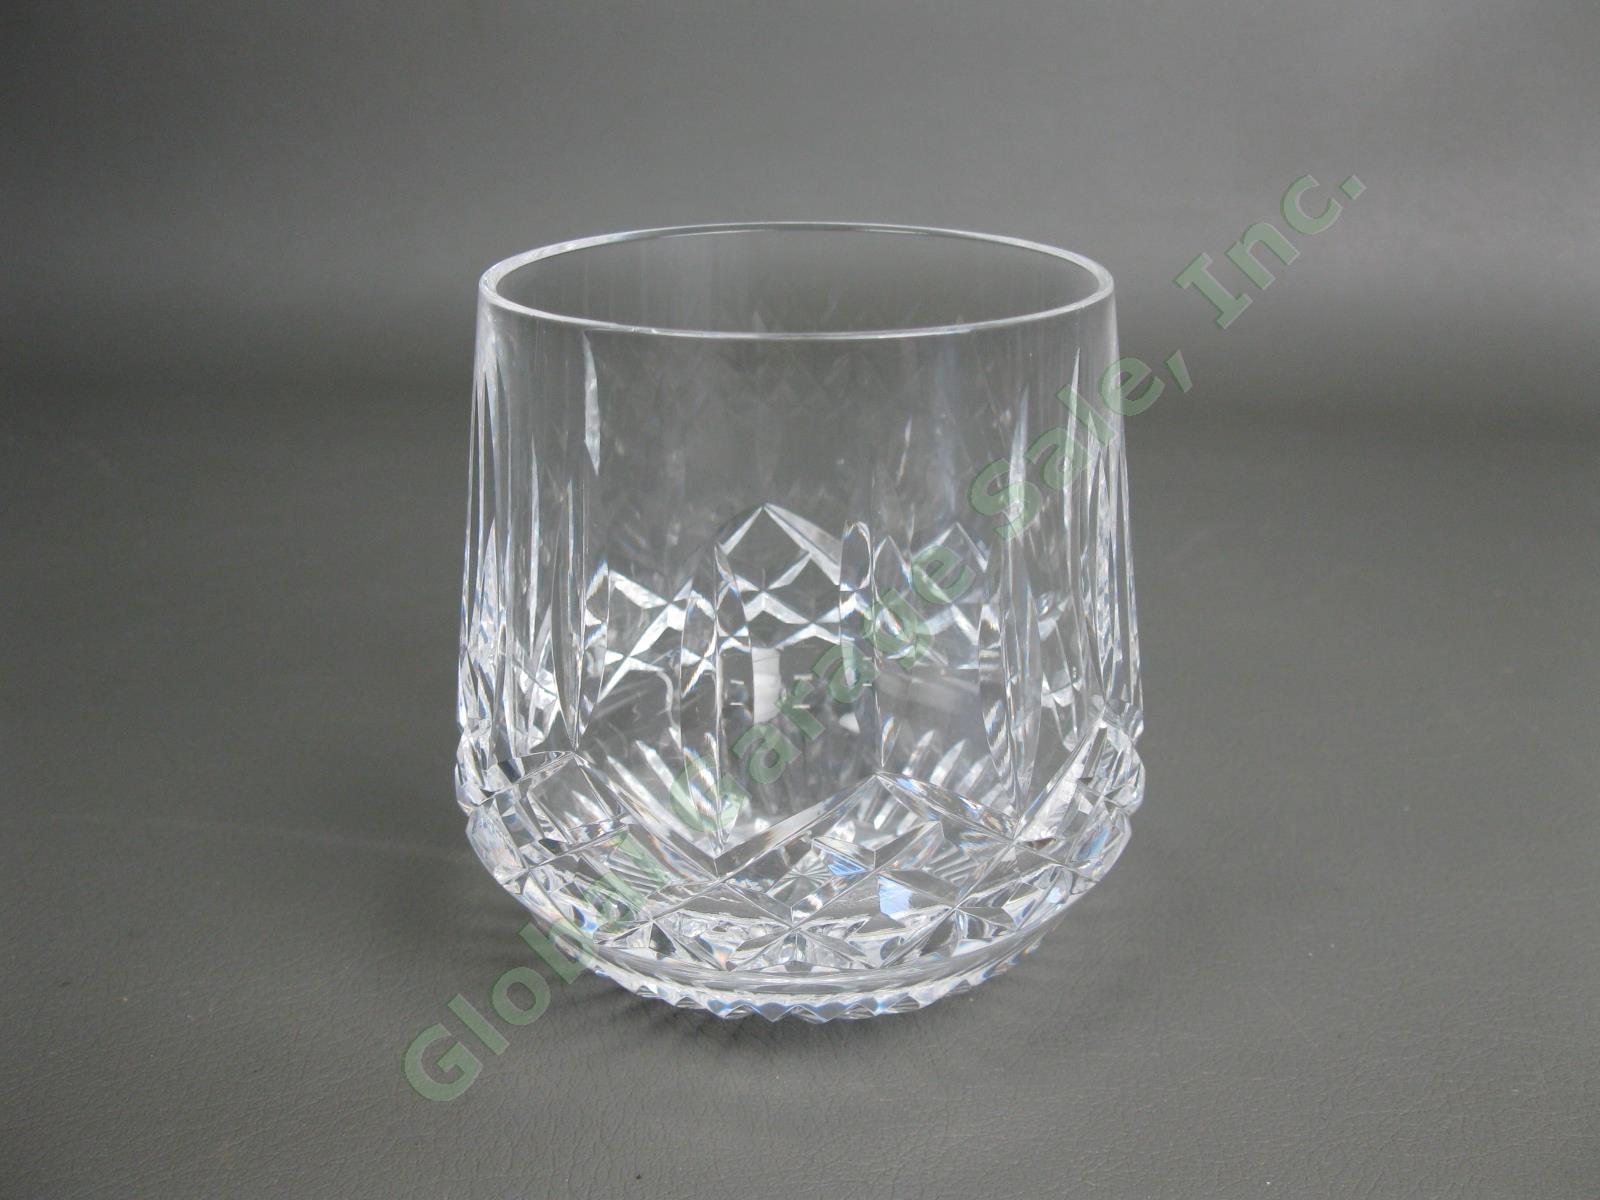 Original Waterford Crystal Lismore Roly Poly Old Fashioned Irish Whiskey Tumbler